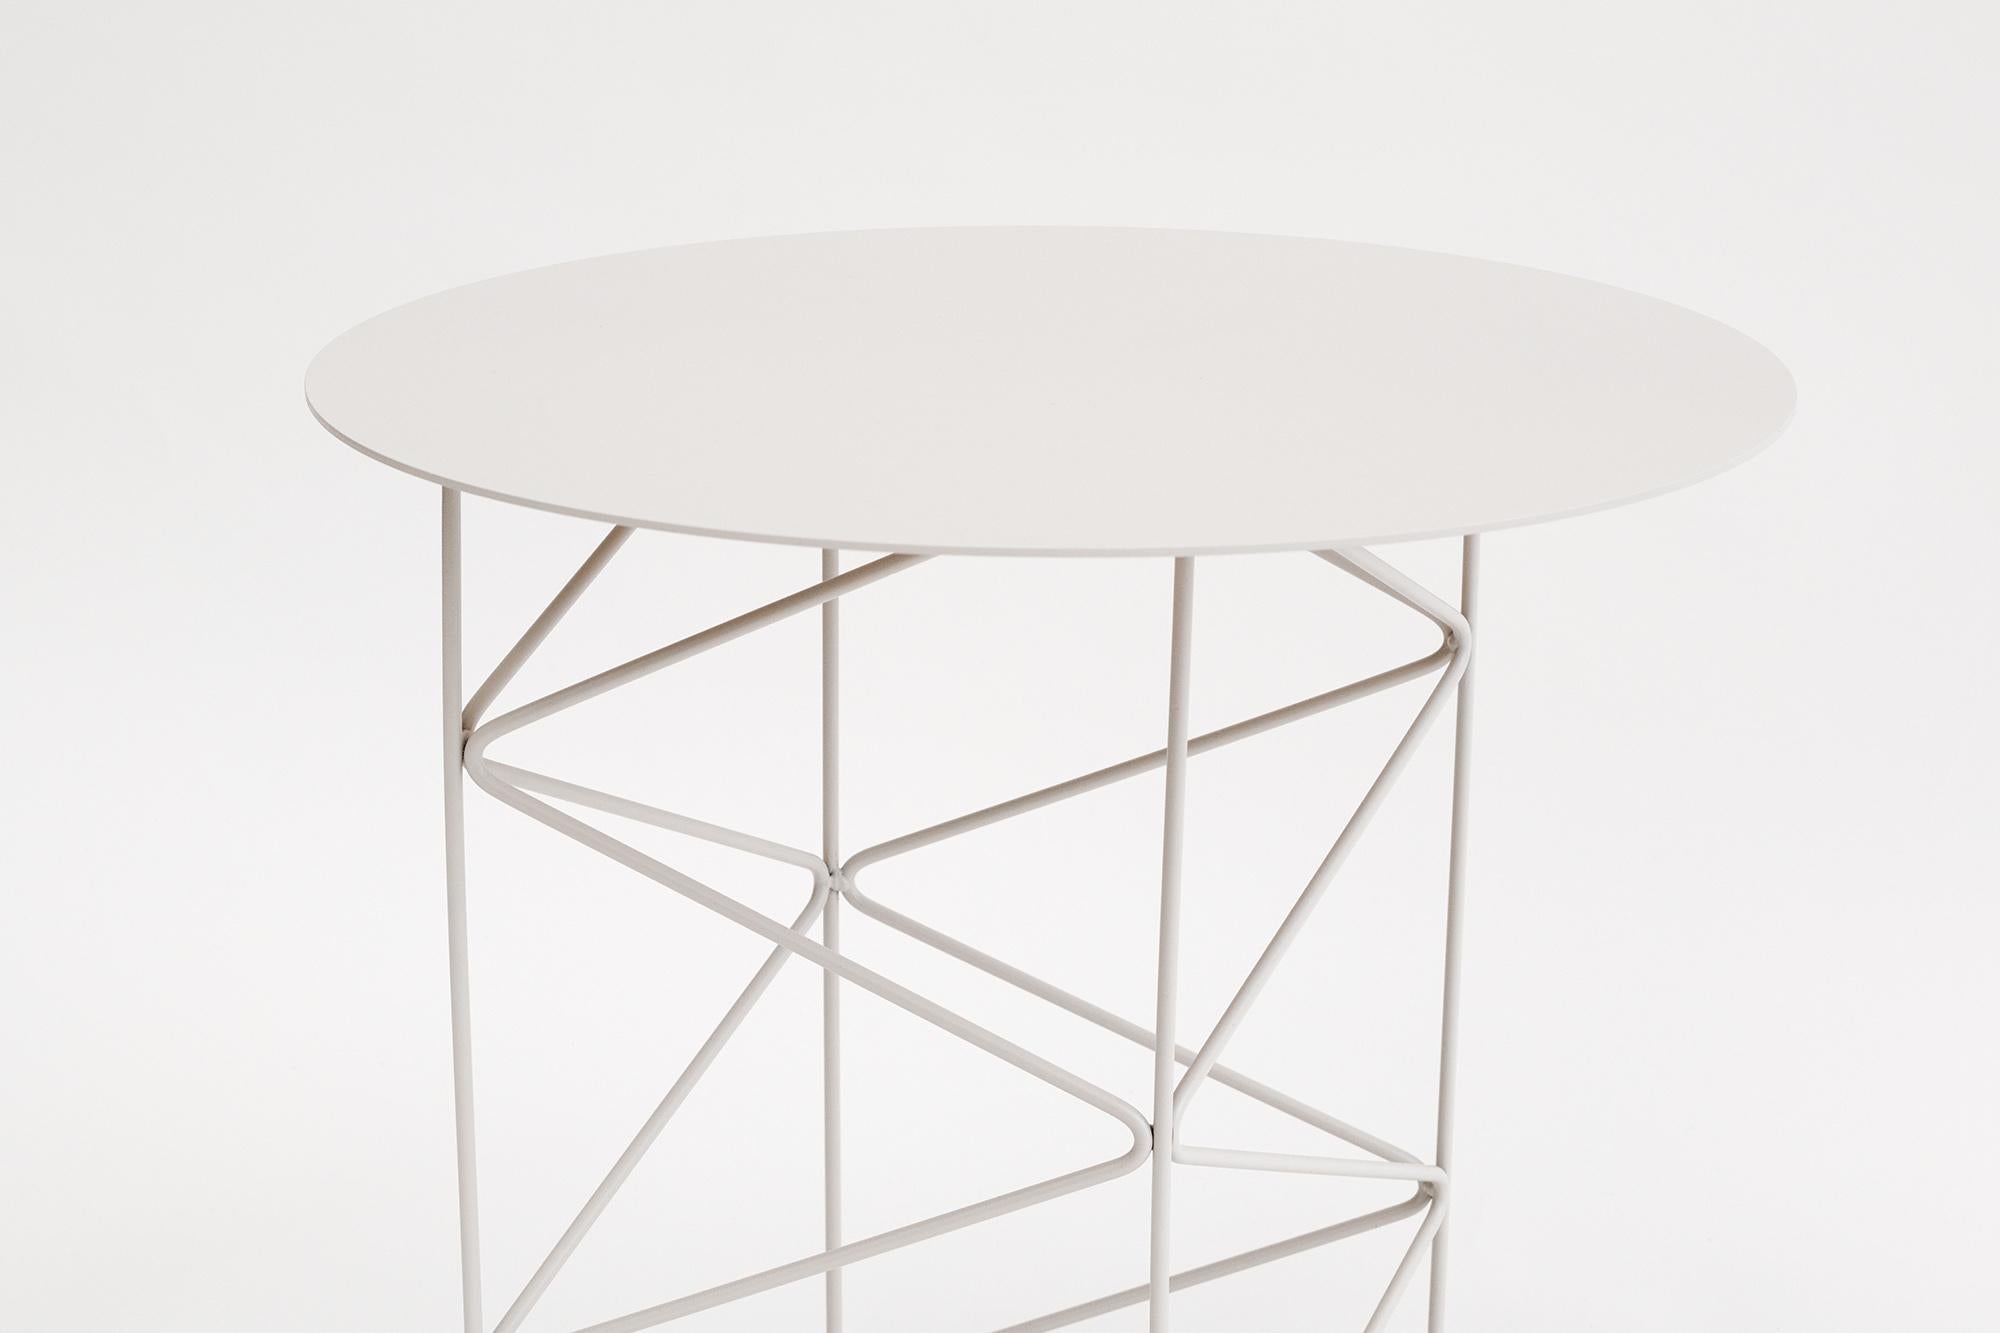 Inspired by the high-tech architectural movement, the INOS side table celebrates the aesthetic value of its metal structure. The stark lines of the welded steel frame create an ever-shifting geometry of light and shade as one moves around the